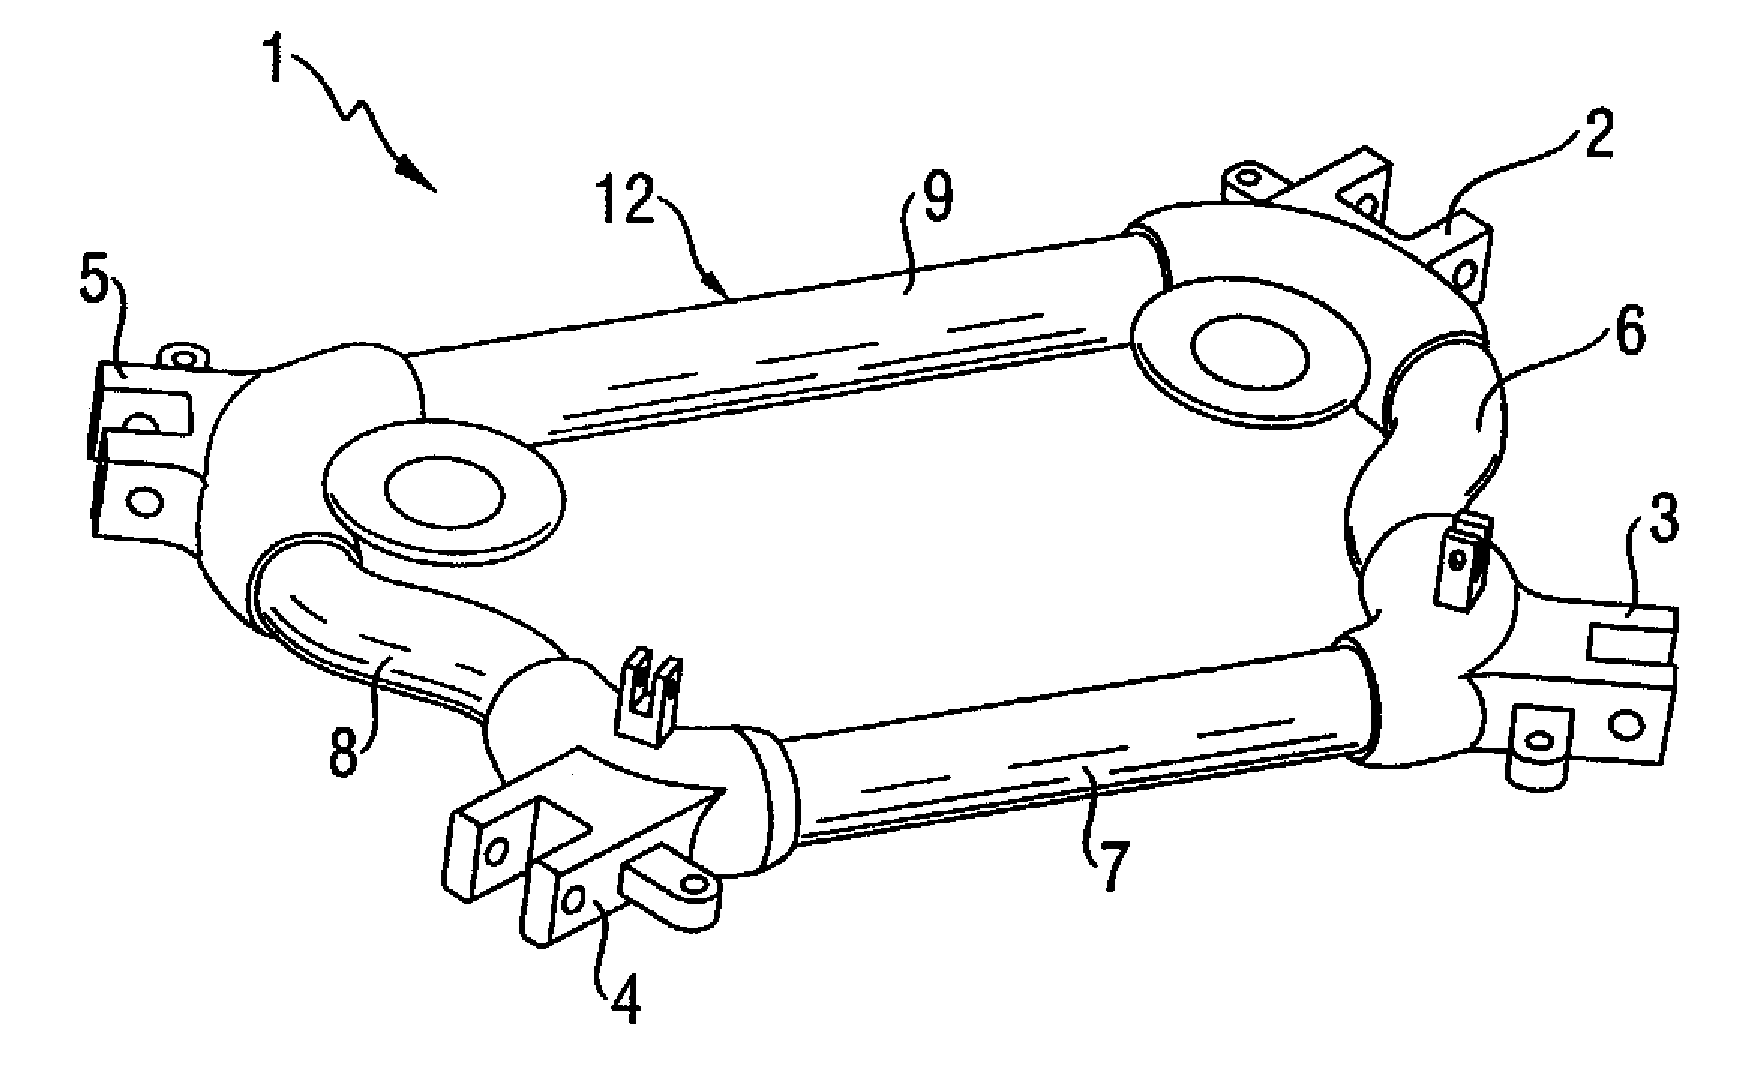 Method of making a subframe of a motor vehicle, and subframe for a motor vehicle